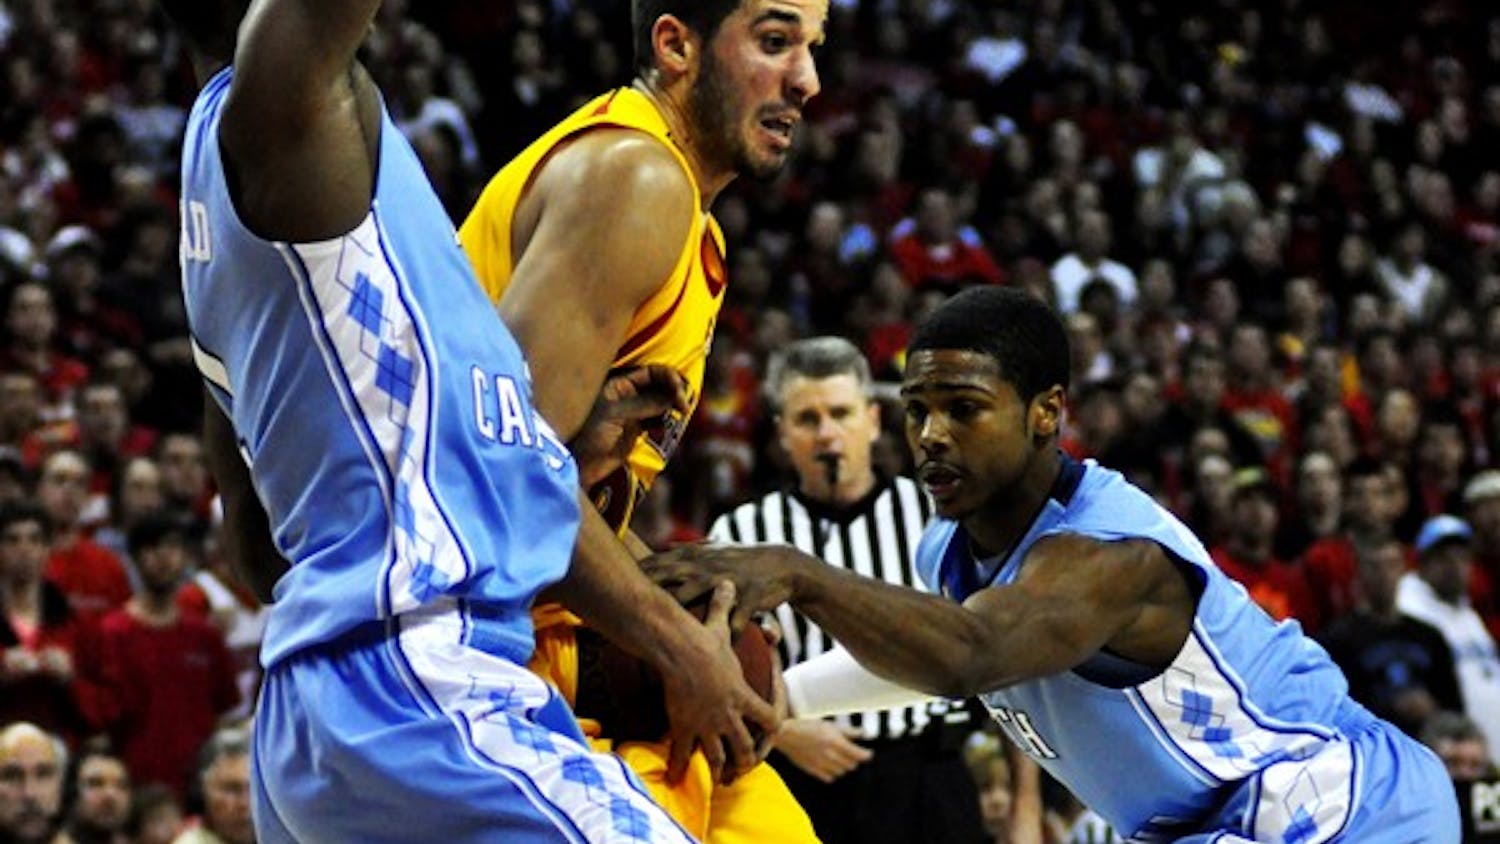 Dexter Strickland attempts to strip the ball from Maryland's Greivis Vasquez. Courtesy of Jaclyn Borowski/The Diamondback